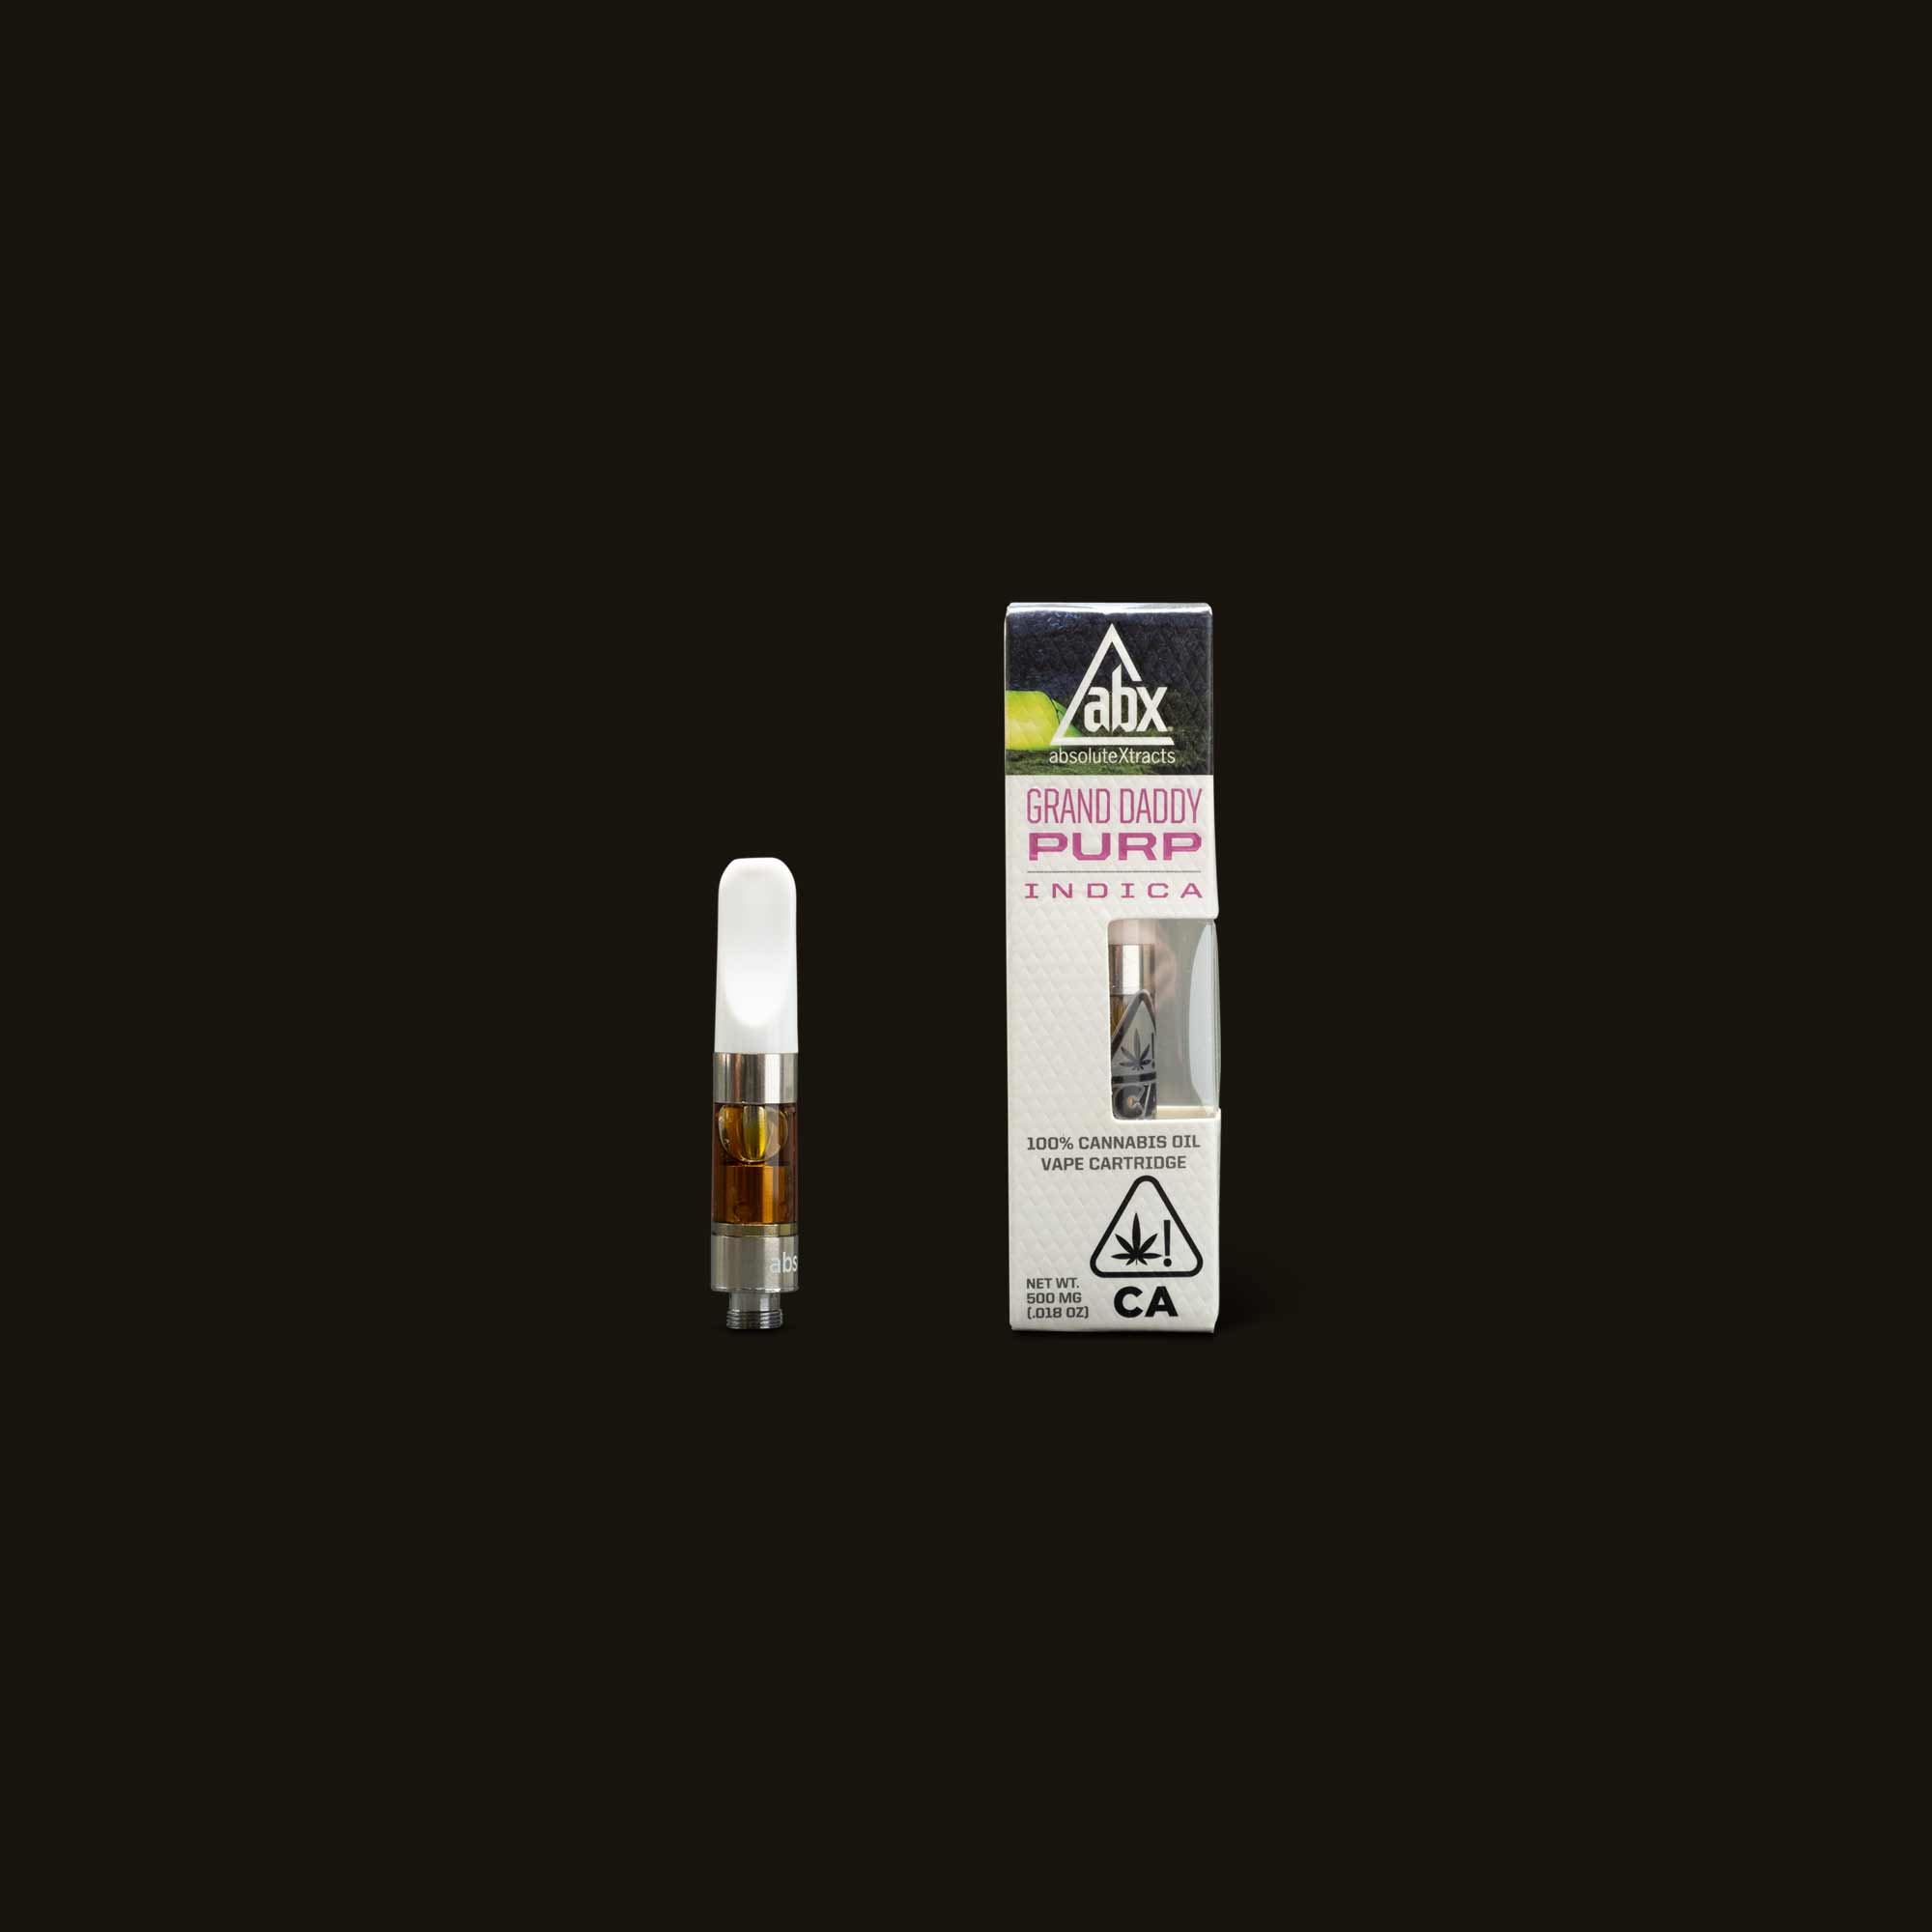 ABSOLUTE-XTRACTS-GRAND-DADDY-PURP-CARTRIDGE-CA-SF-HERO-4-639196